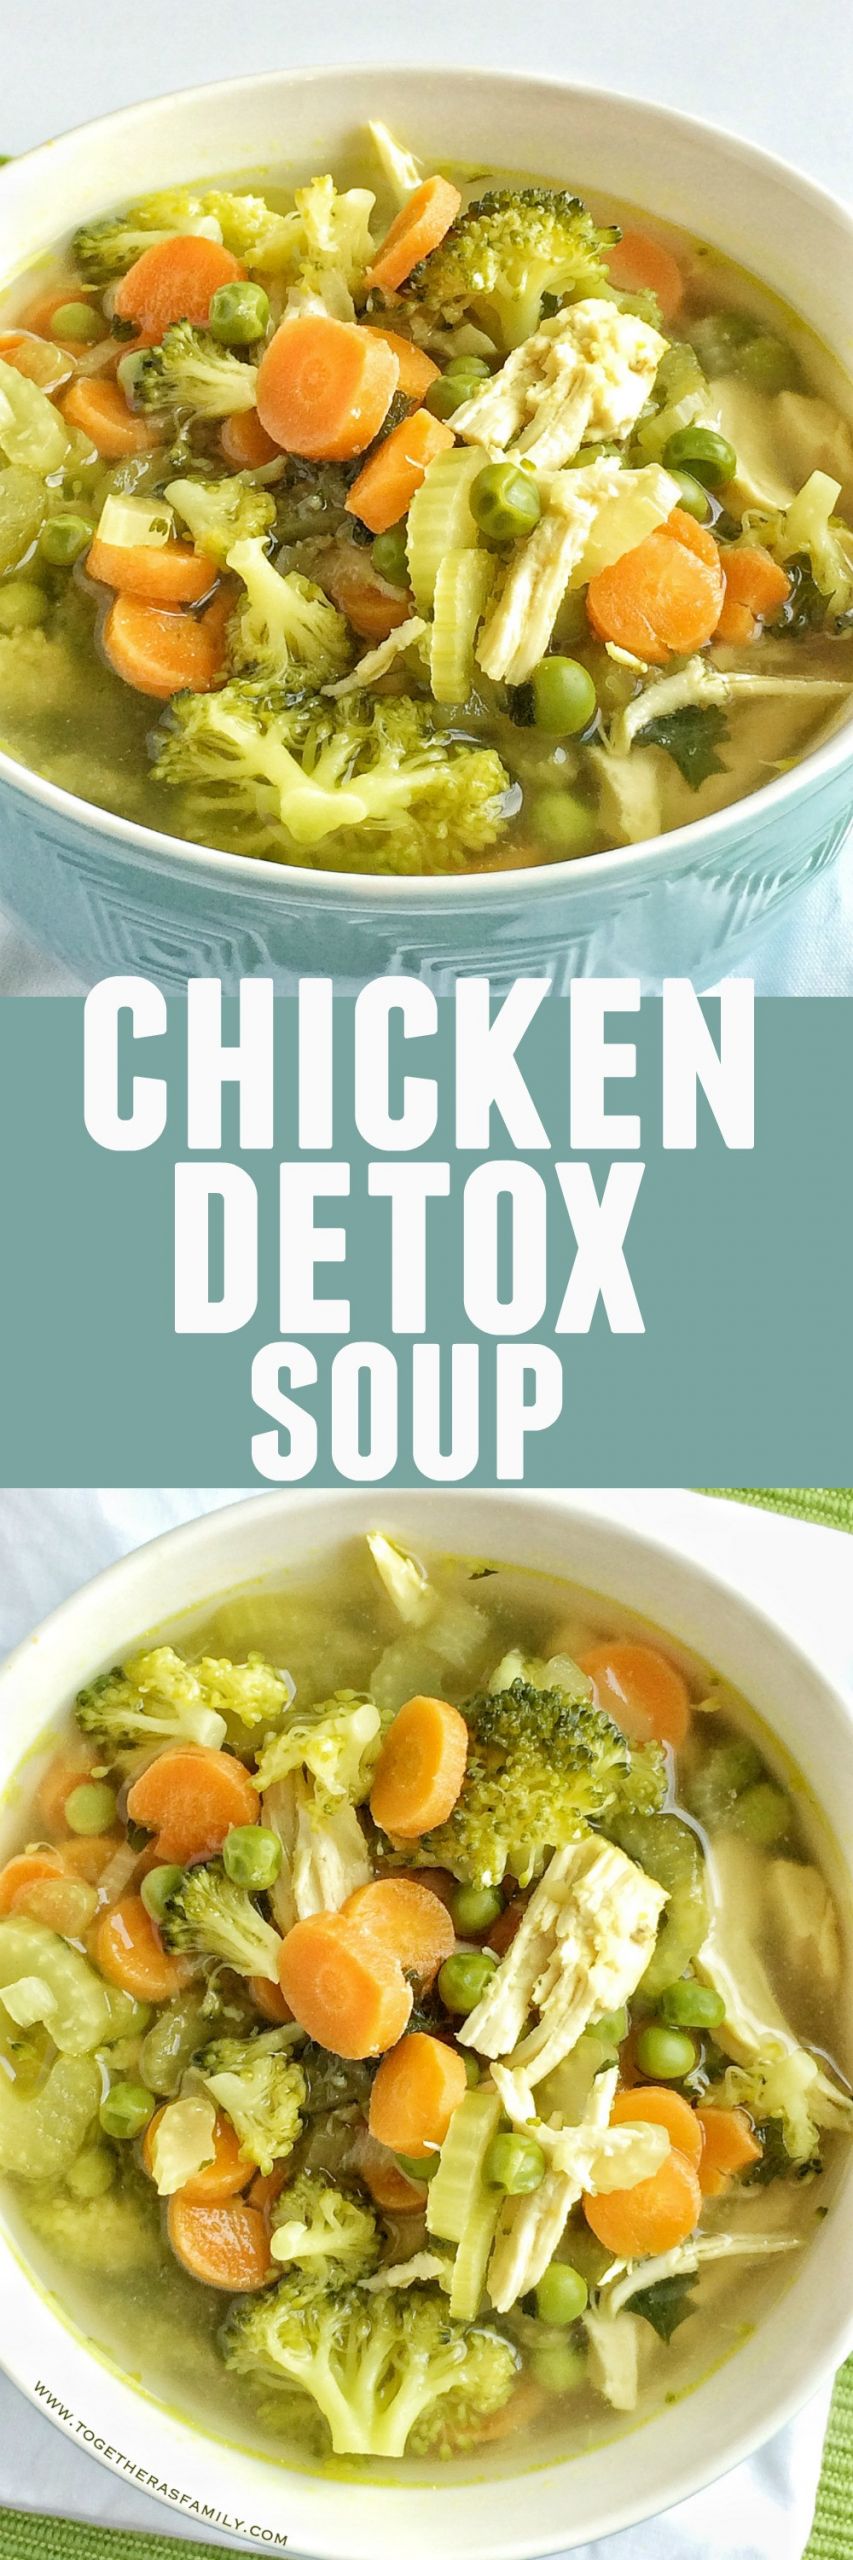 Low Calorie Dinners For Family
 Chicken Detox Soup To her as Family